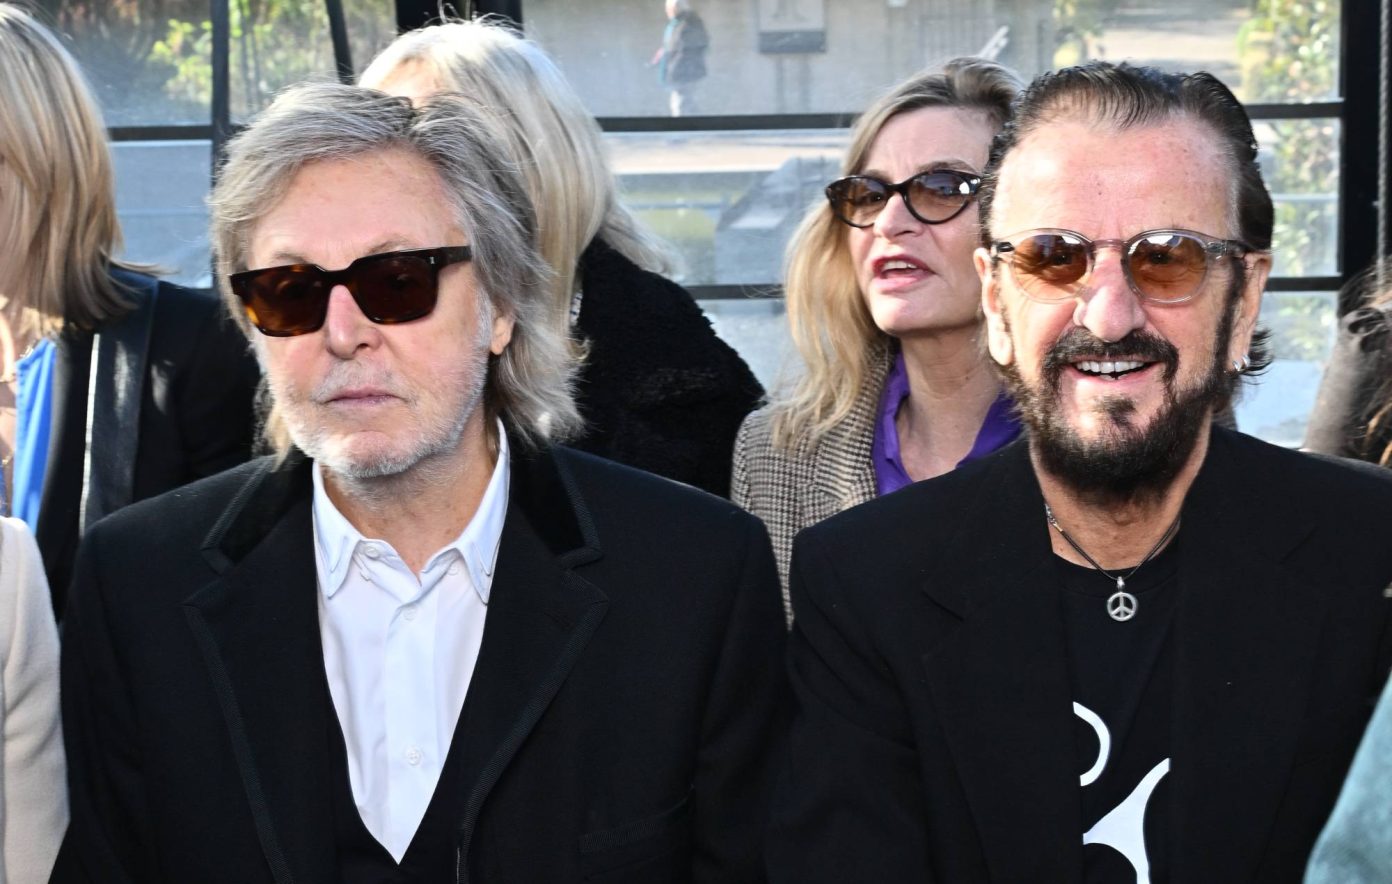 You are currently viewing Remember When: Ringo Starr and Paul McCartney Star in Odd 11-Minute Short Film ‘The Cooler’